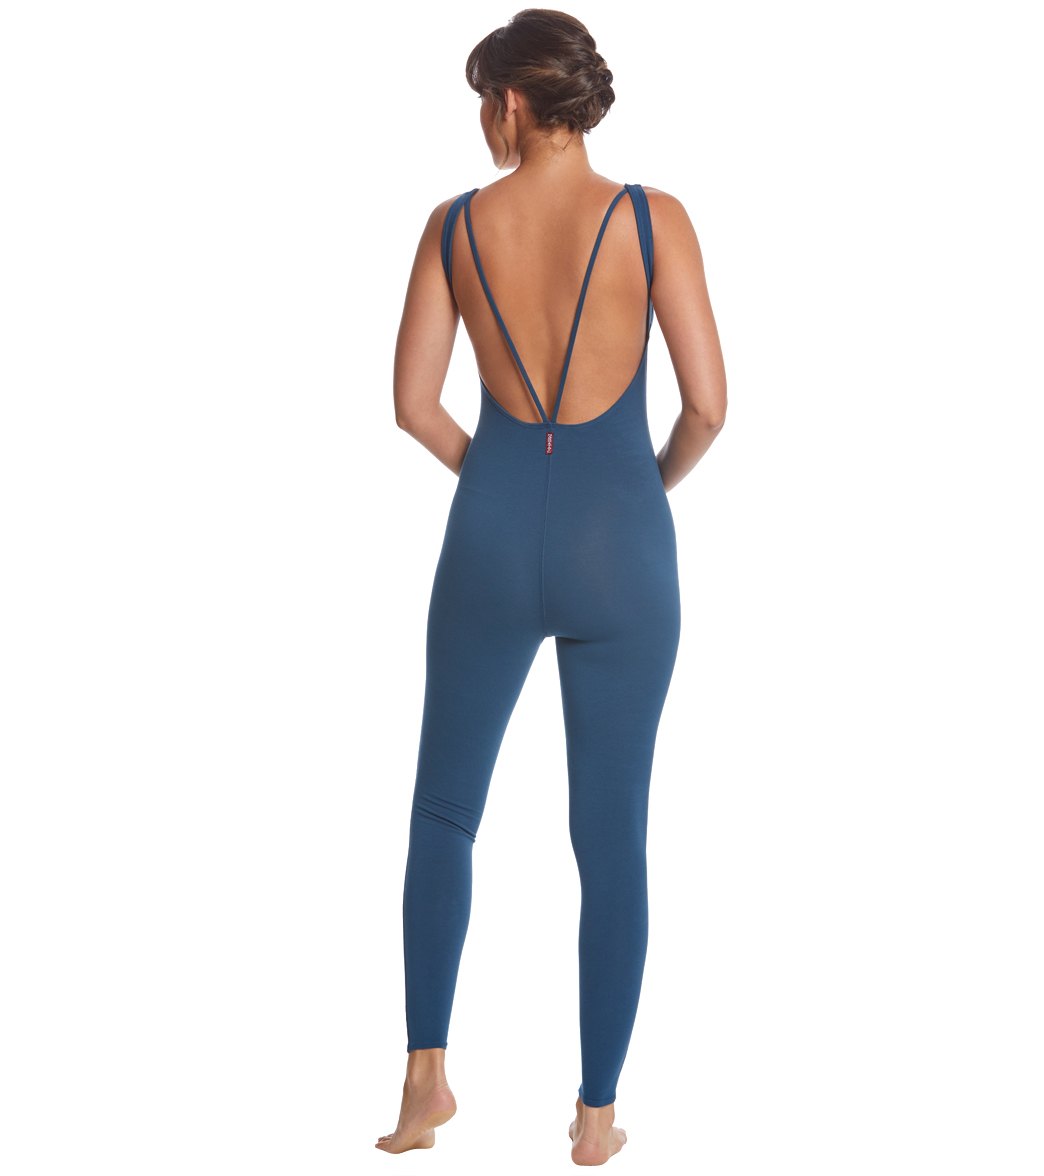 Hard Tail Low Back Yoga & Dance Leotard at SwimOutlet.com - Free Shipping